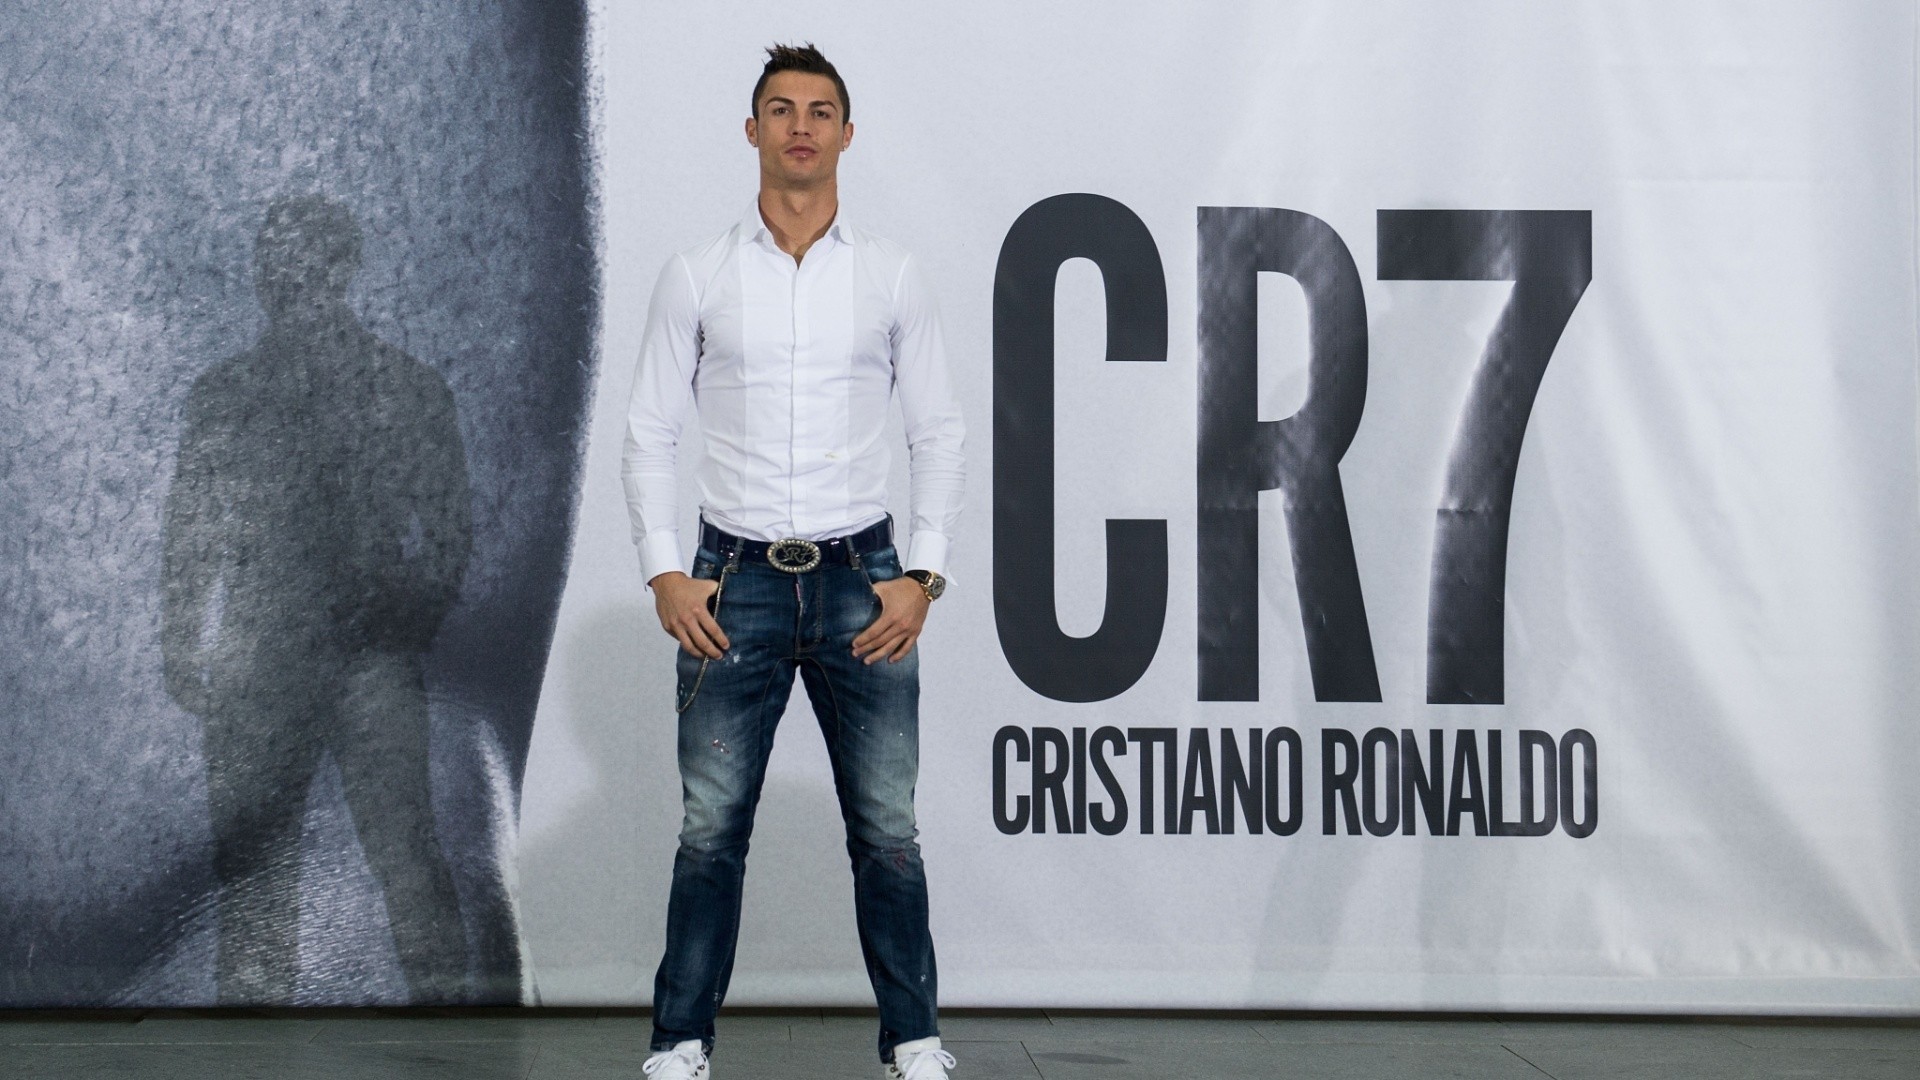 1920x1080 Cristiano Ronaldo HD Images-Get the Newest Collection of Cristiano Ronaldo  HD Images for your DesktopPCs,Cell Phones and Tablets Only at Wallpapers…